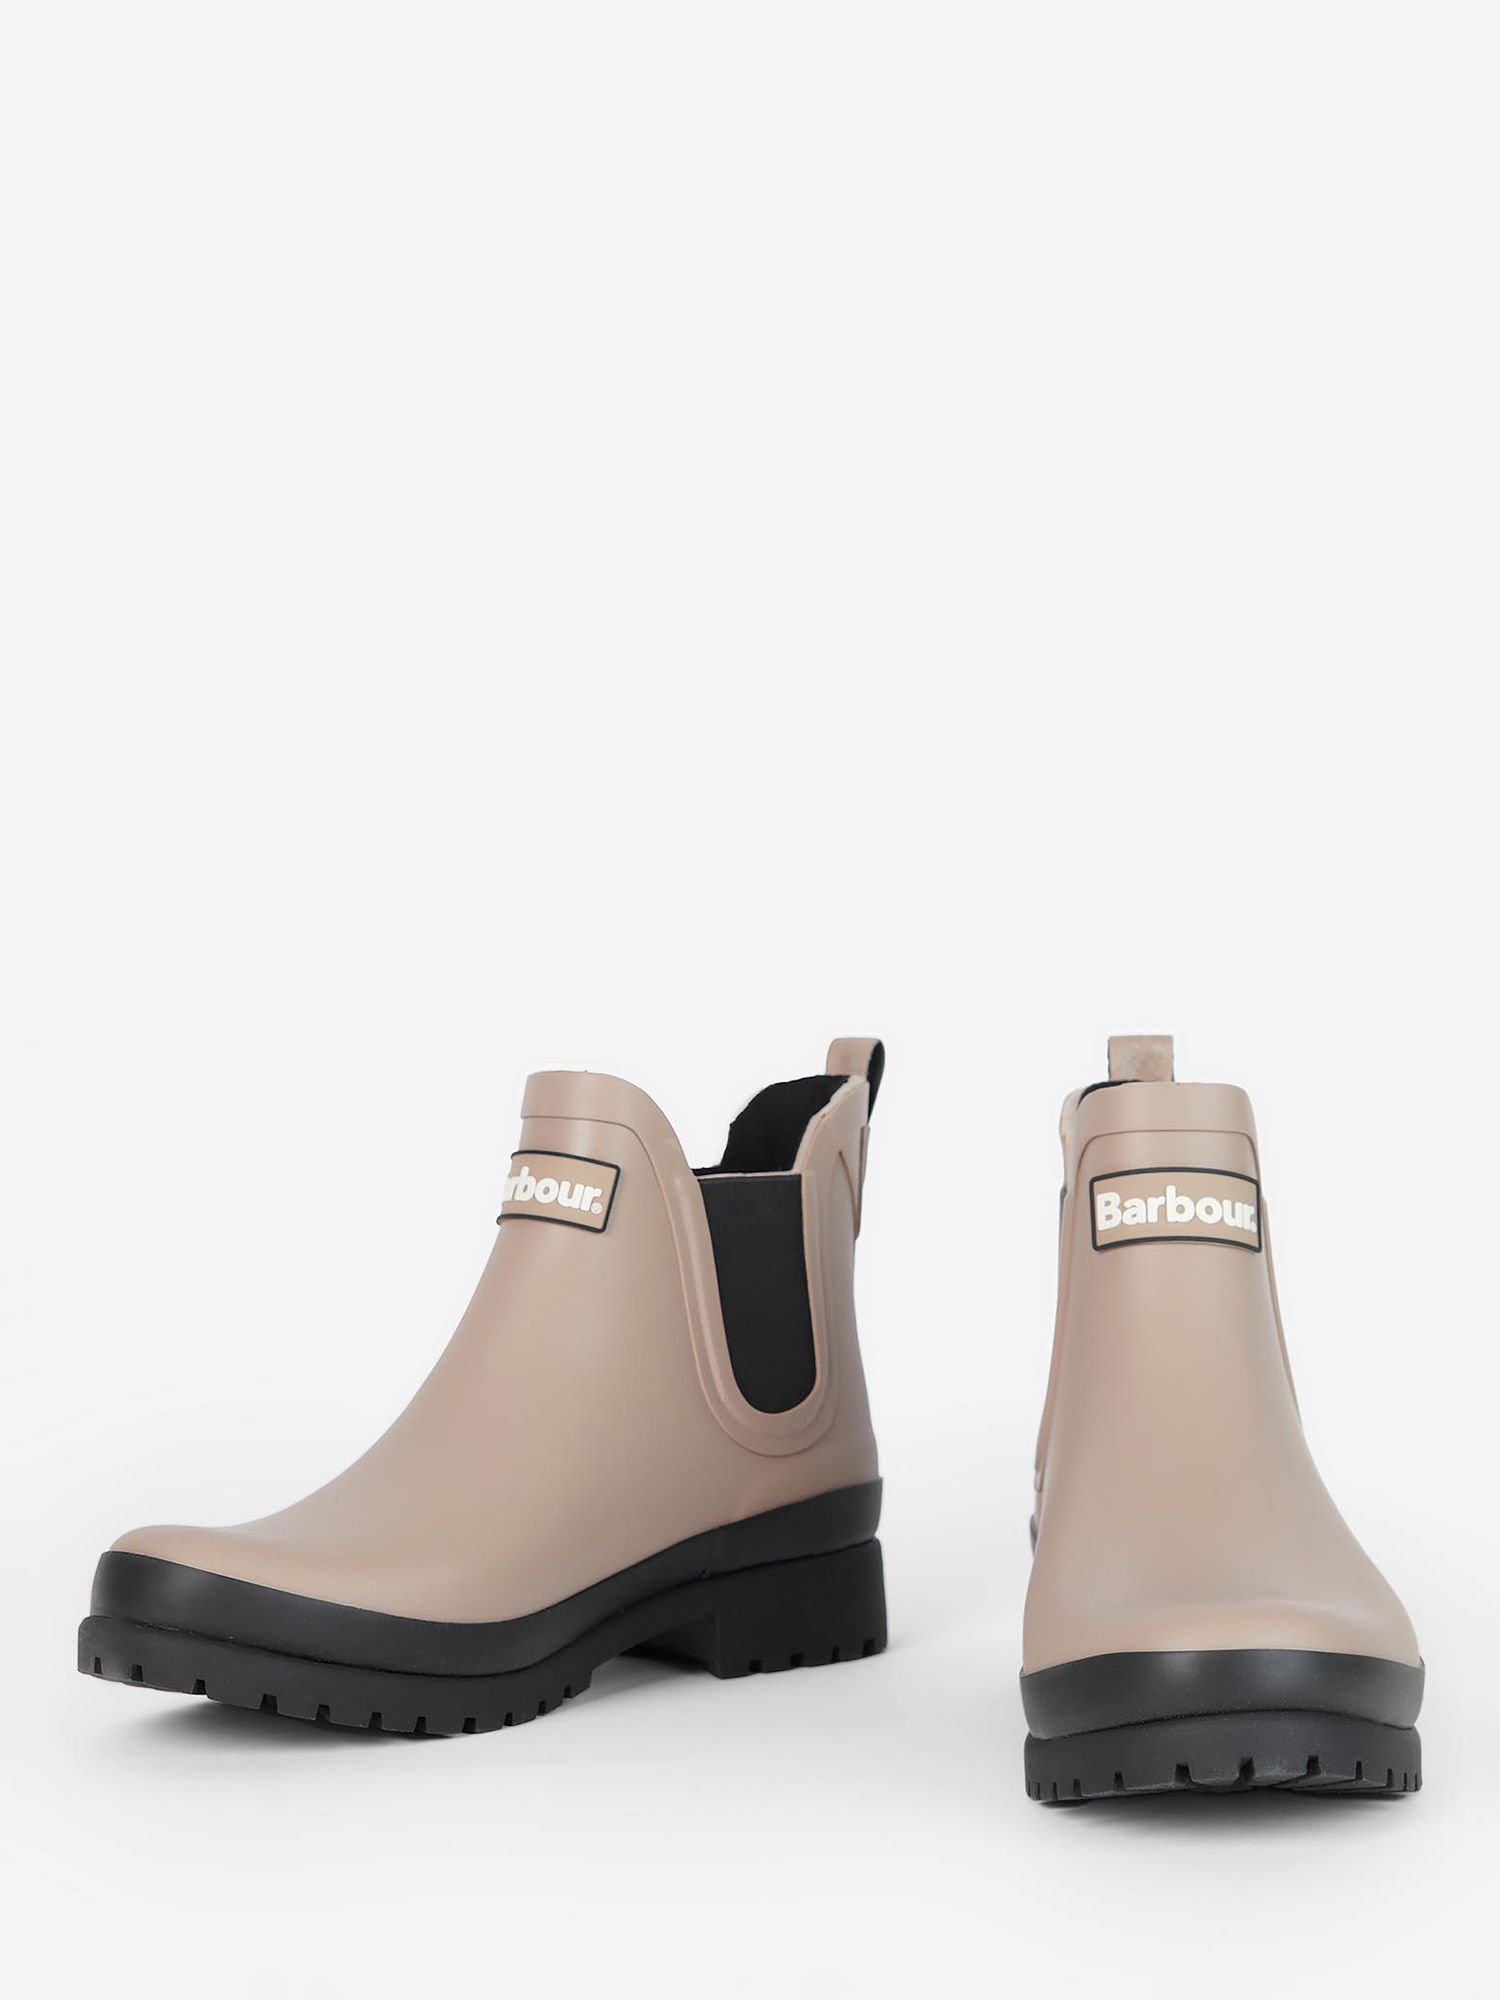 Barbour Mallow Chelsea Wellington Boots, Light Trench